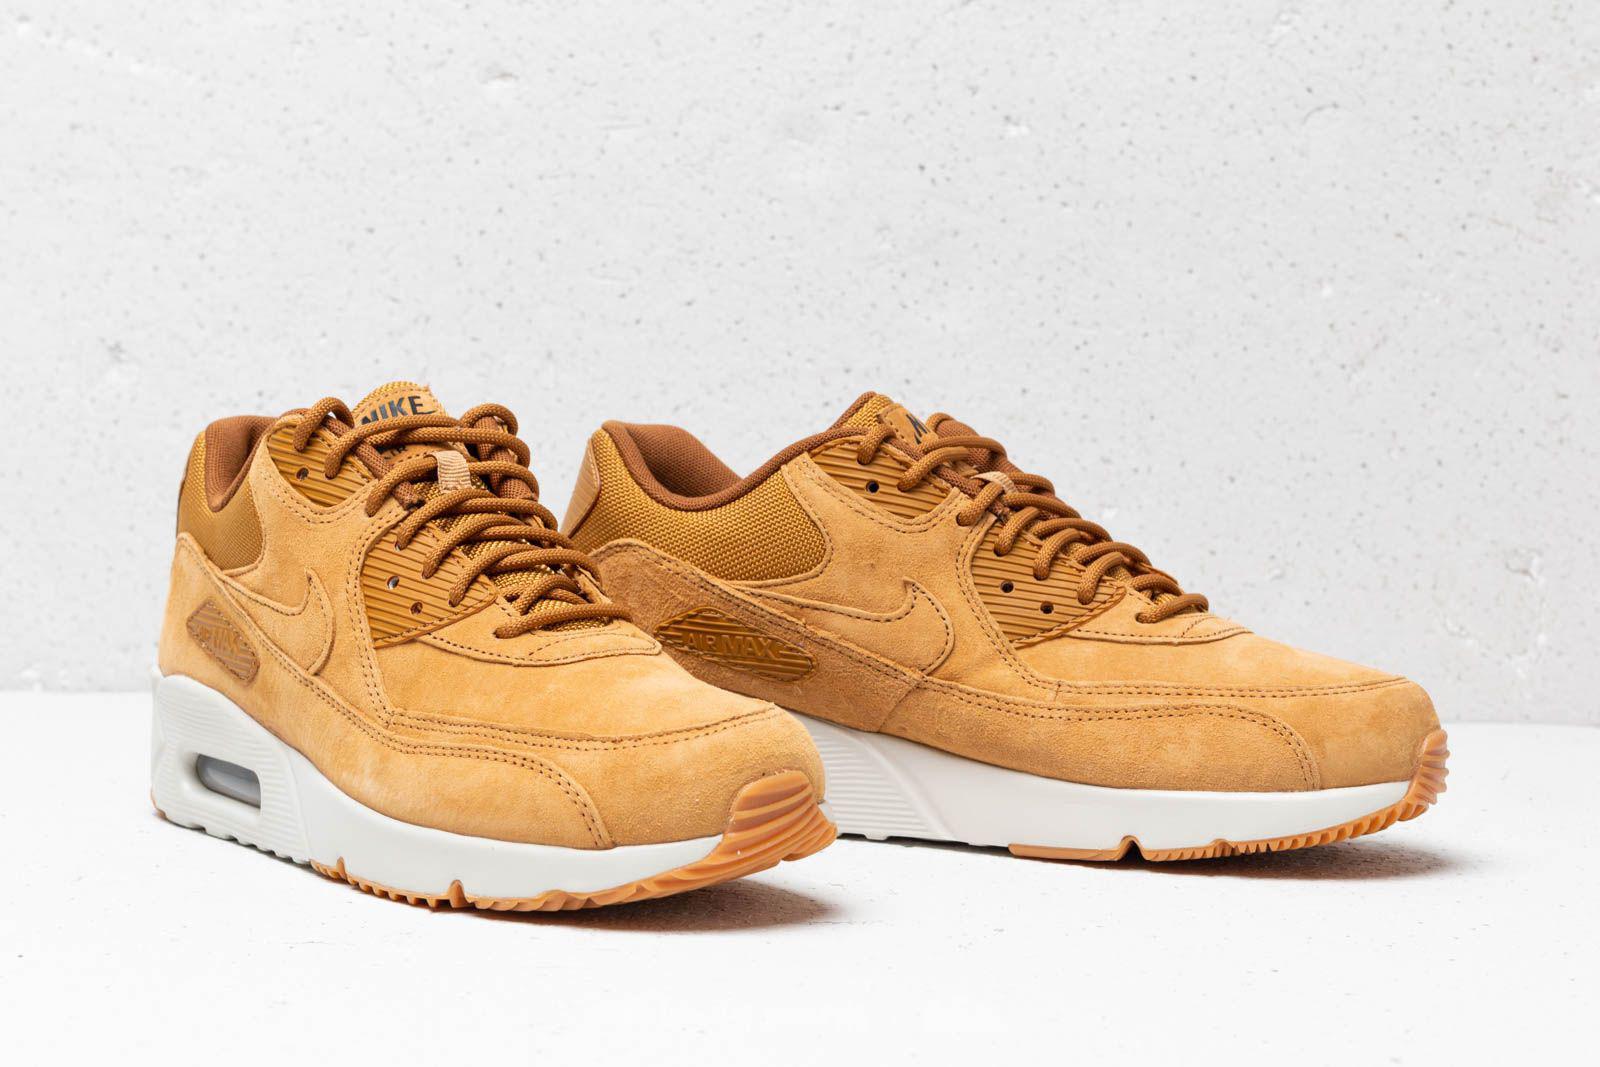 Nike Air Max 90 Ultra 2.0 Ltr Wheat Italy, SAVE 53% - aveclumiere.com